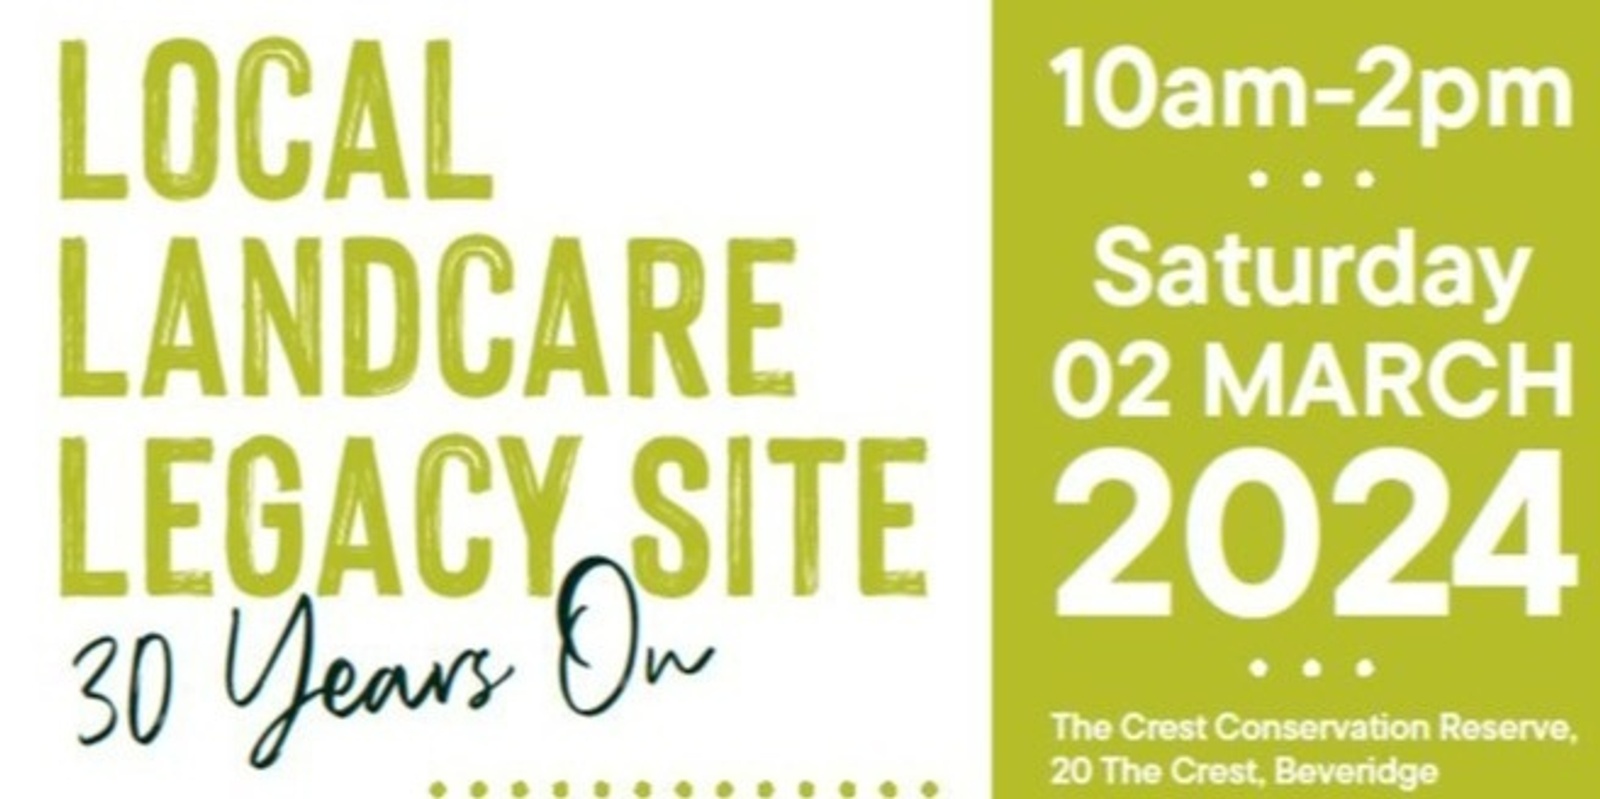 Banner image for Local Landcare Legacy Site - 30 Years On